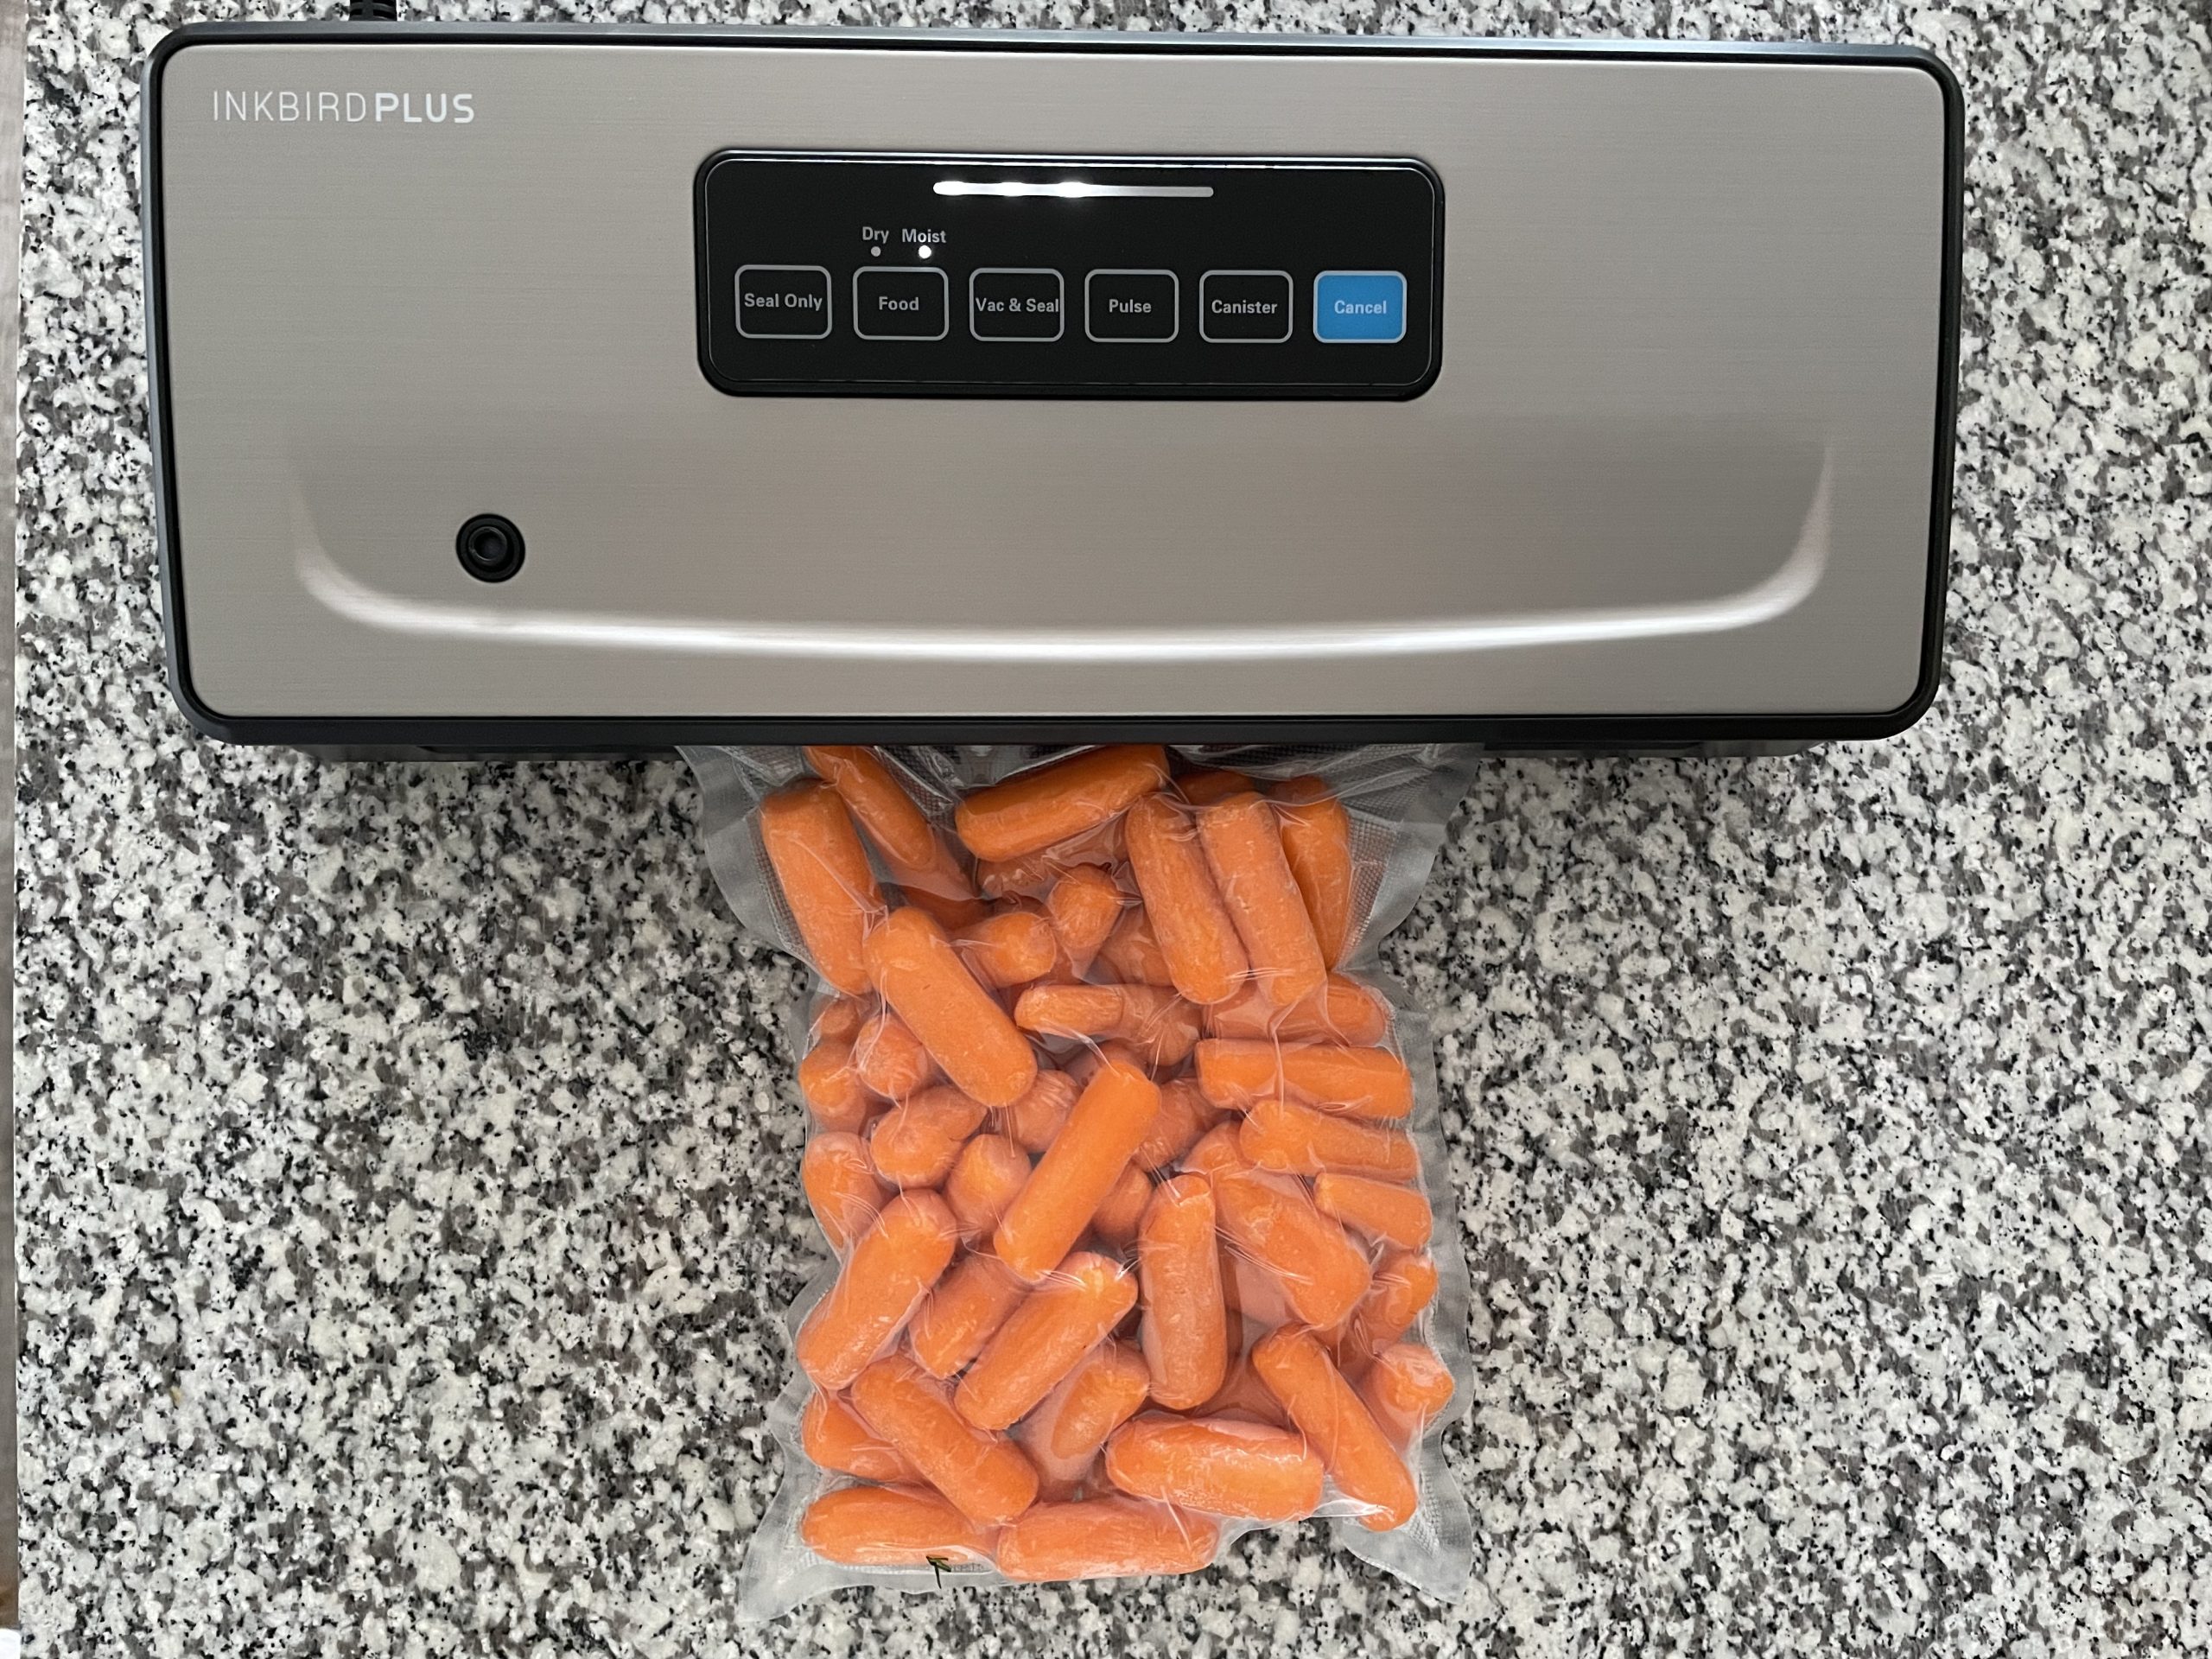 INKBIRD plus vacuum sealer and a bag of sealed carrots